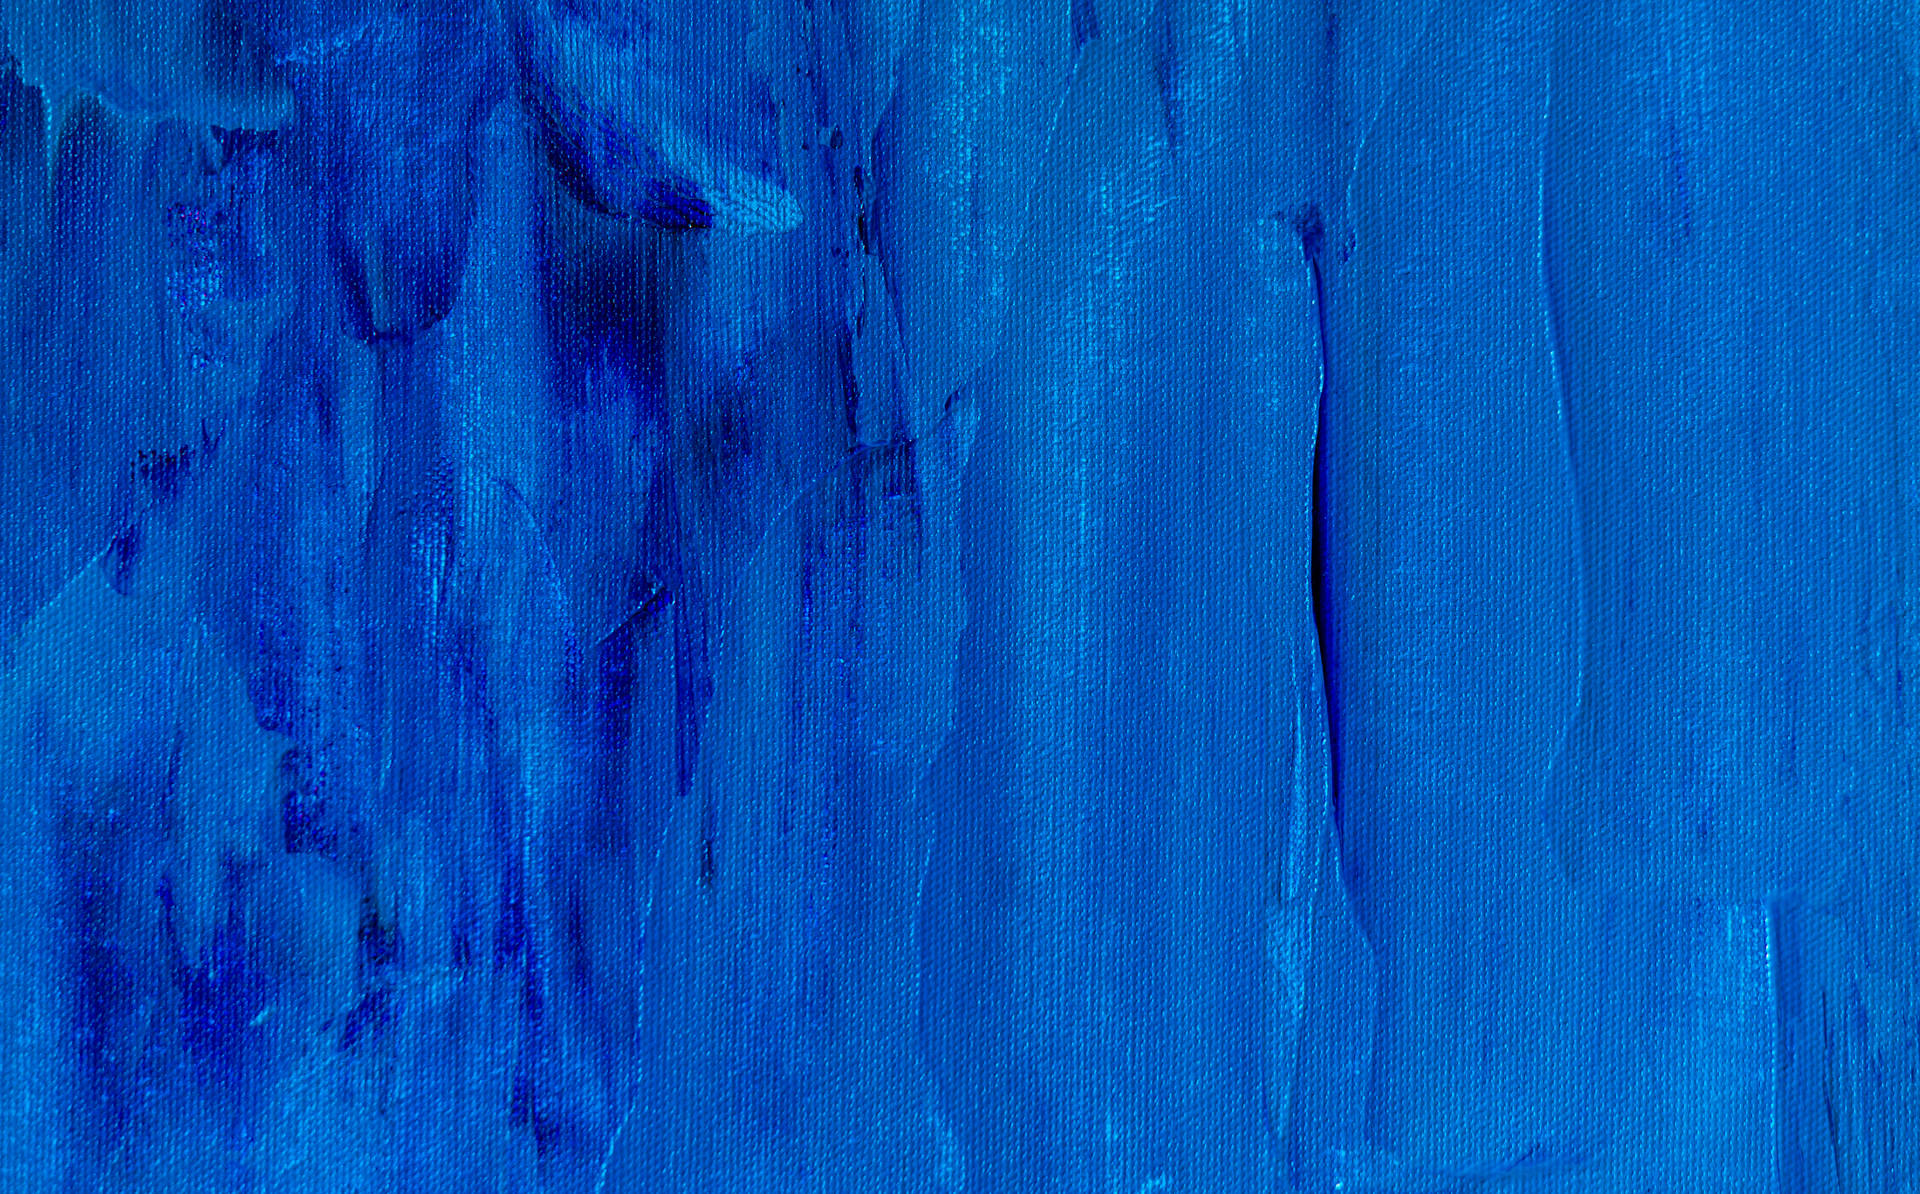 Blue Textured Painting Background